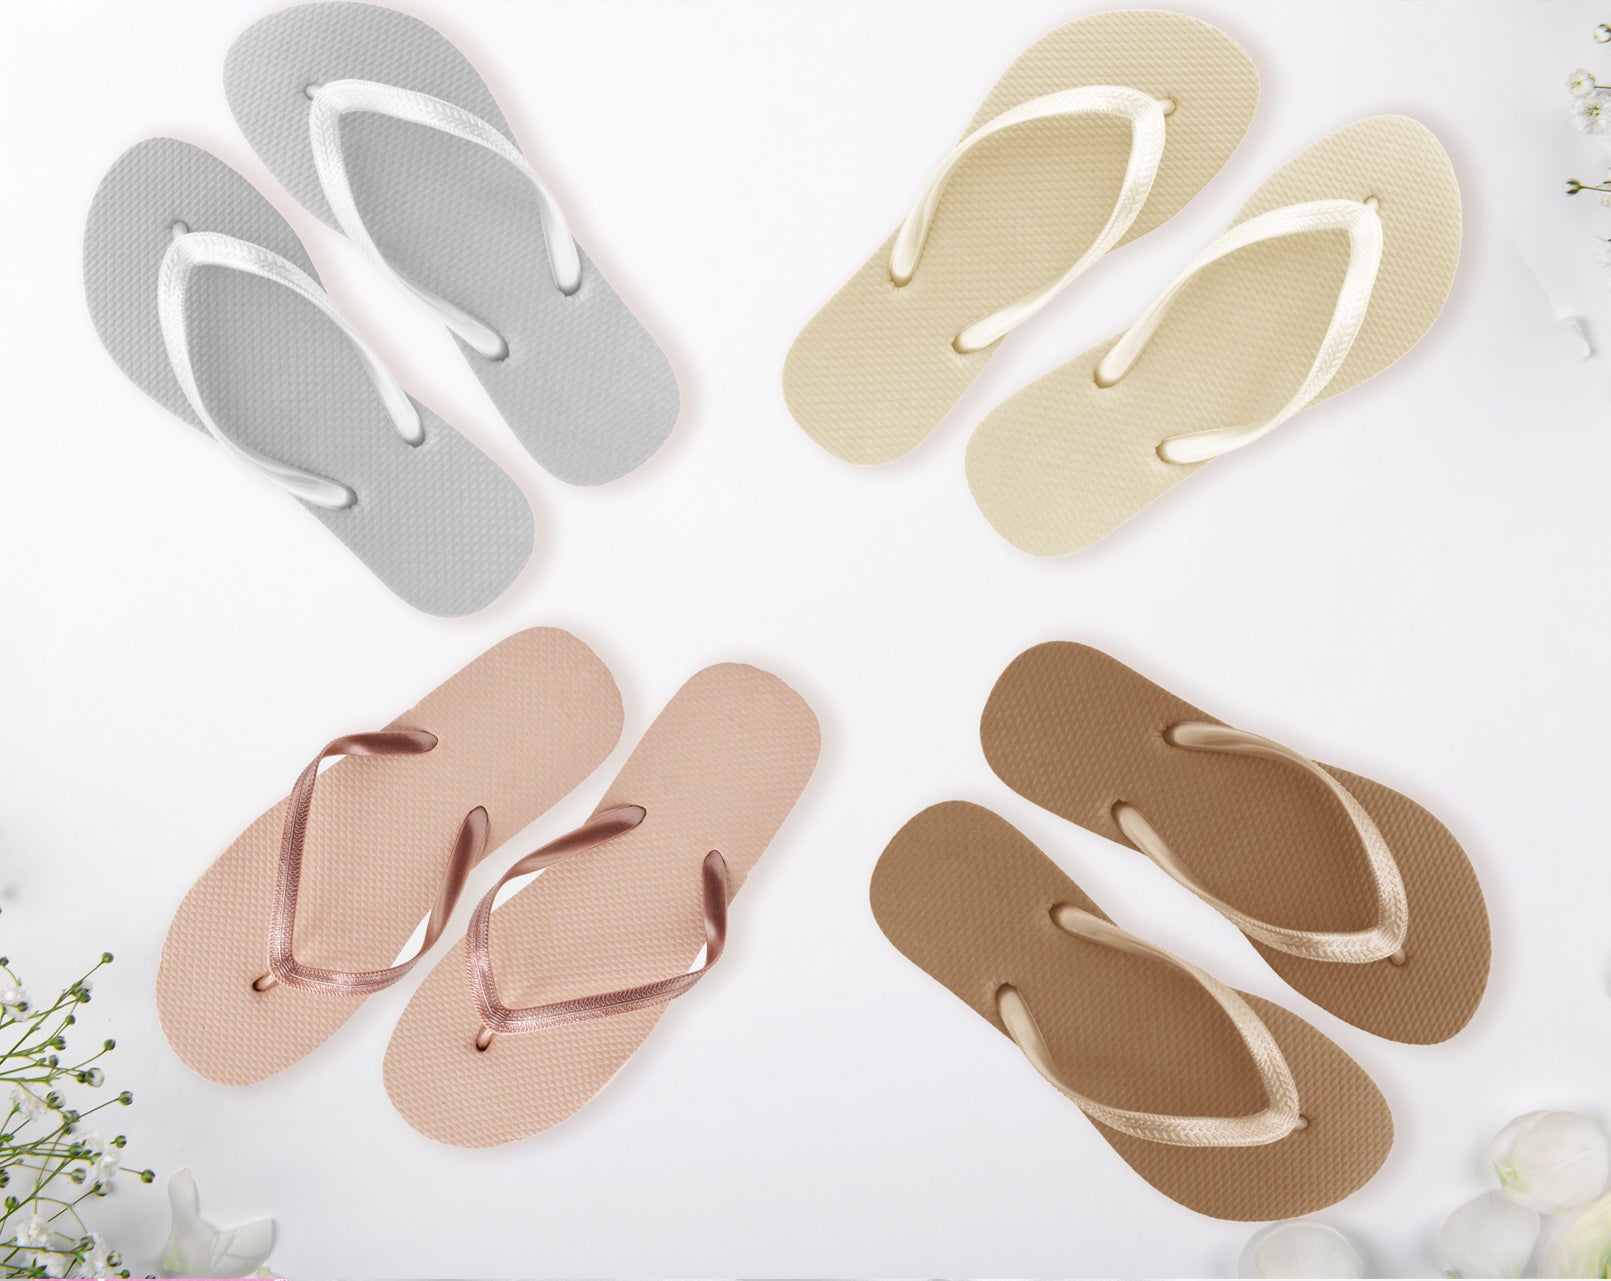 Simplicity Meets Elegance: Choosing the Perfect Flip Flops for Your Wedding